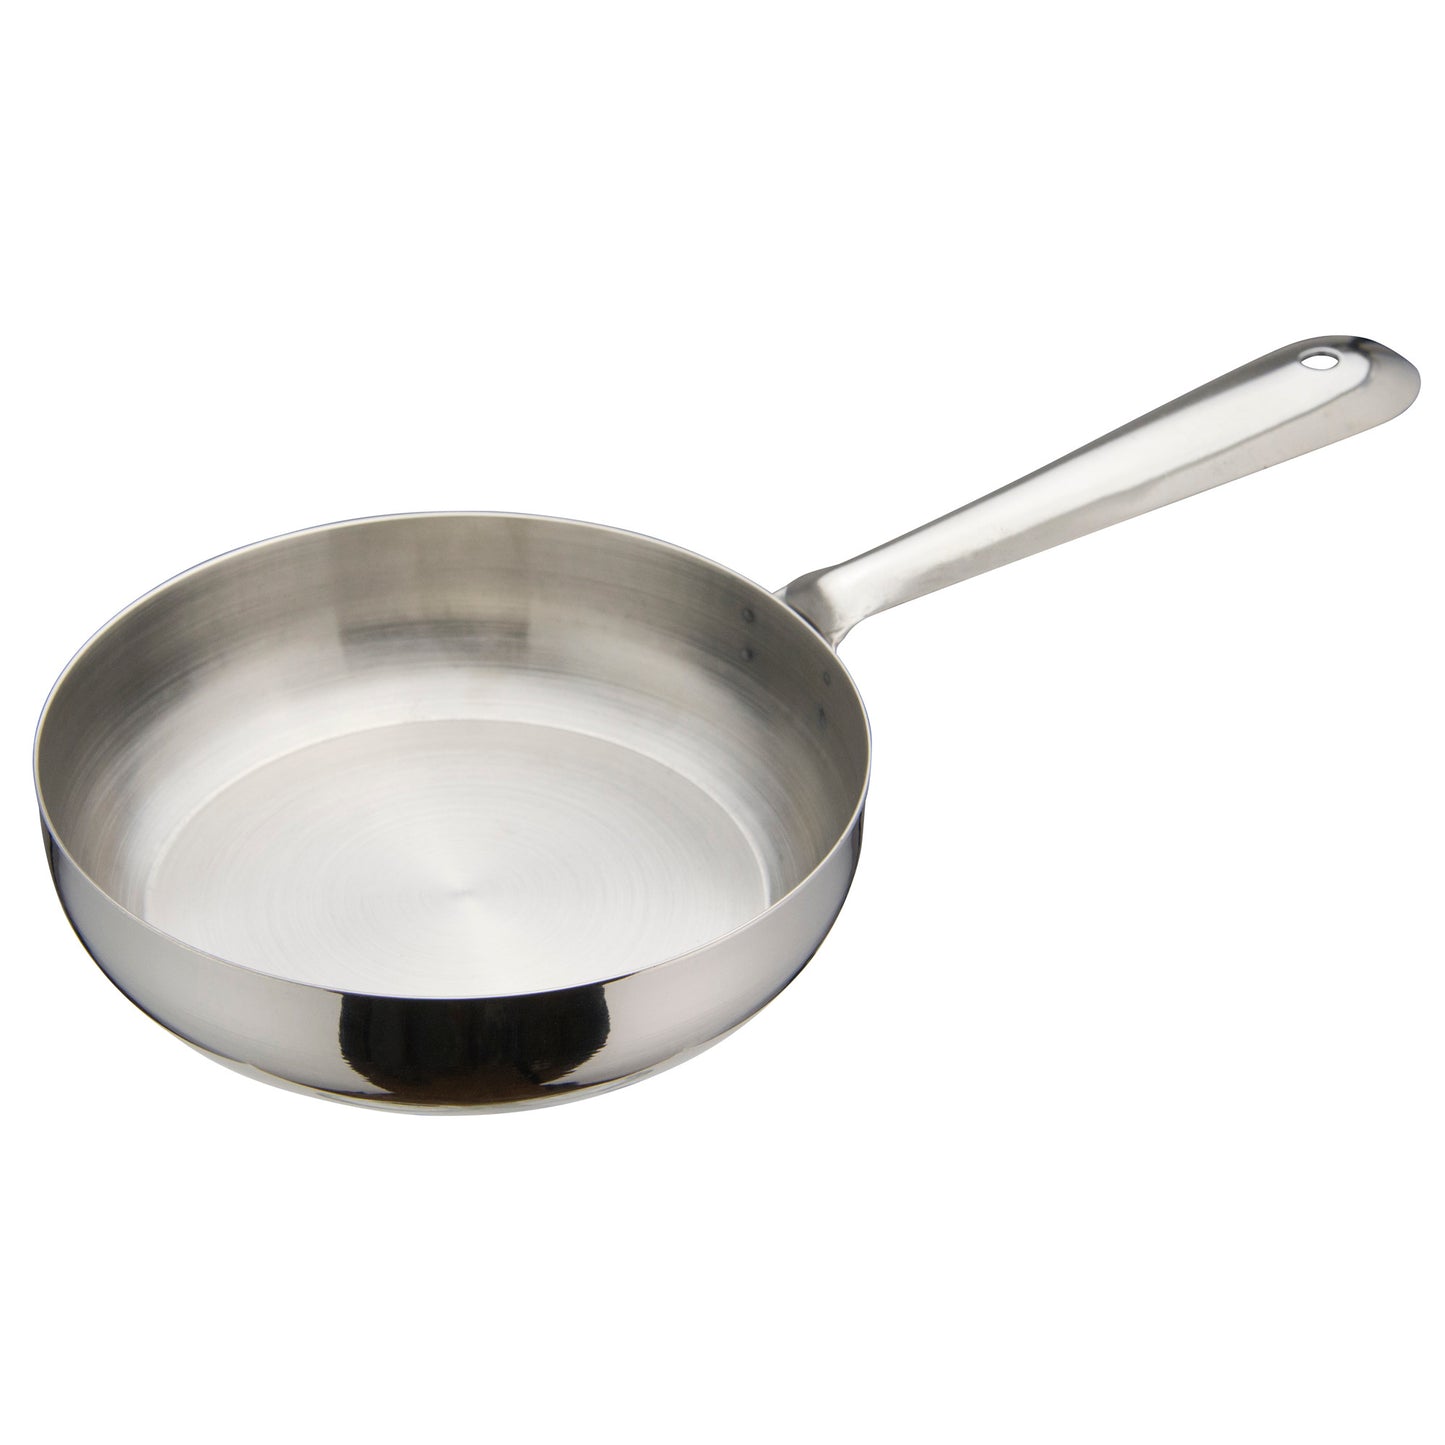 DCWC-103S - Mini Fry Pan, Stainless Steel - 5"